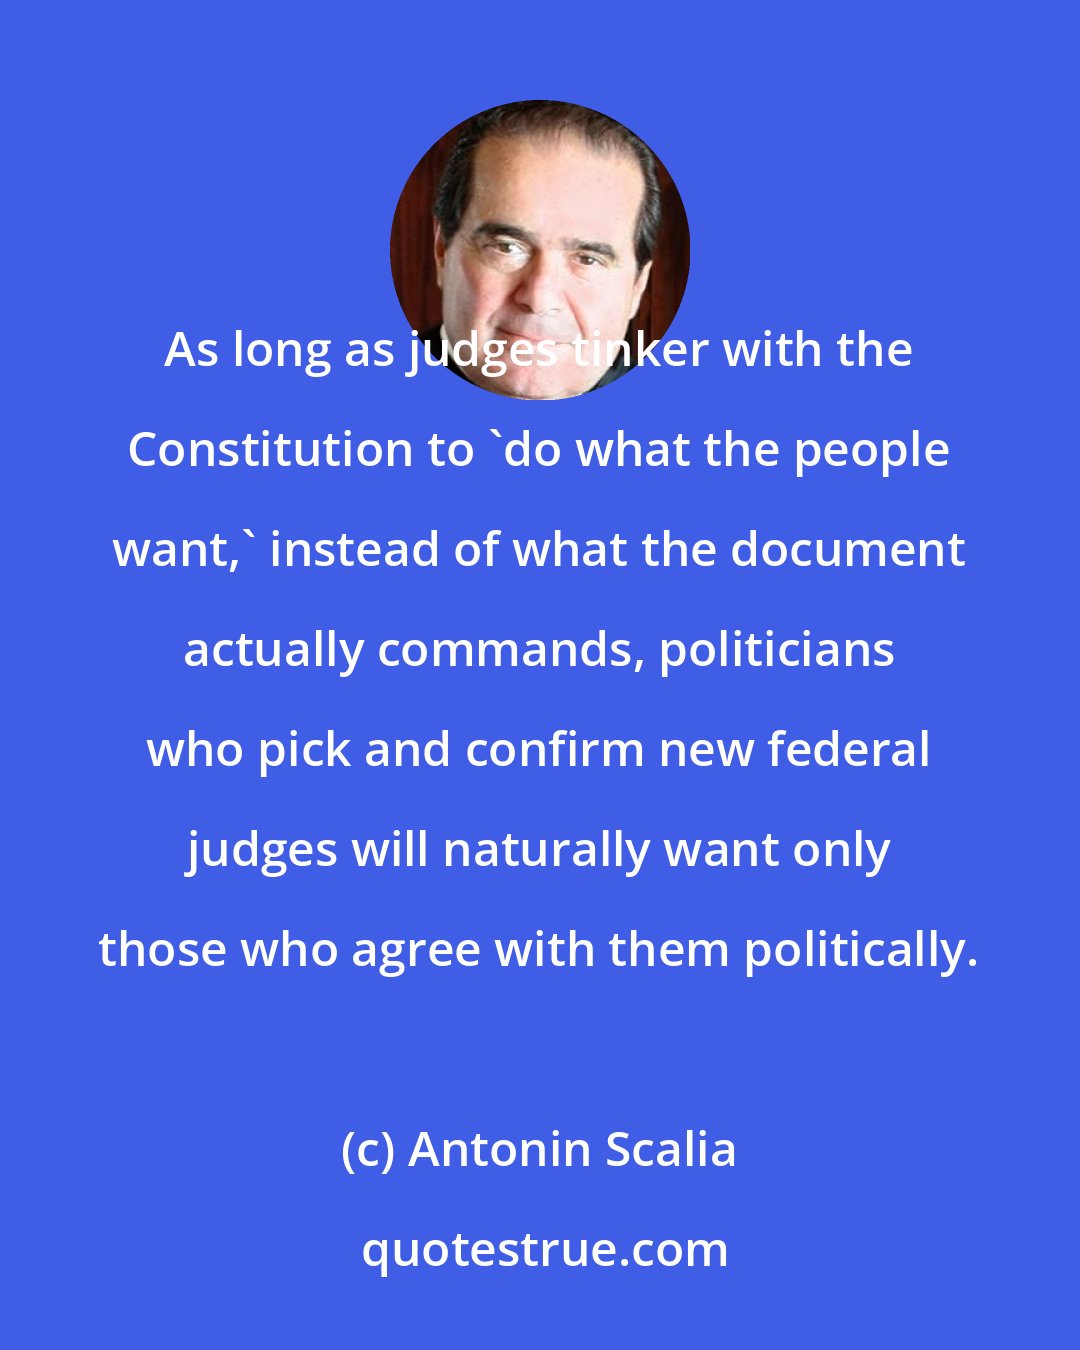 Antonin Scalia: As long as judges tinker with the Constitution to 'do what the people want,' instead of what the document actually commands, politicians who pick and confirm new federal judges will naturally want only those who agree with them politically.